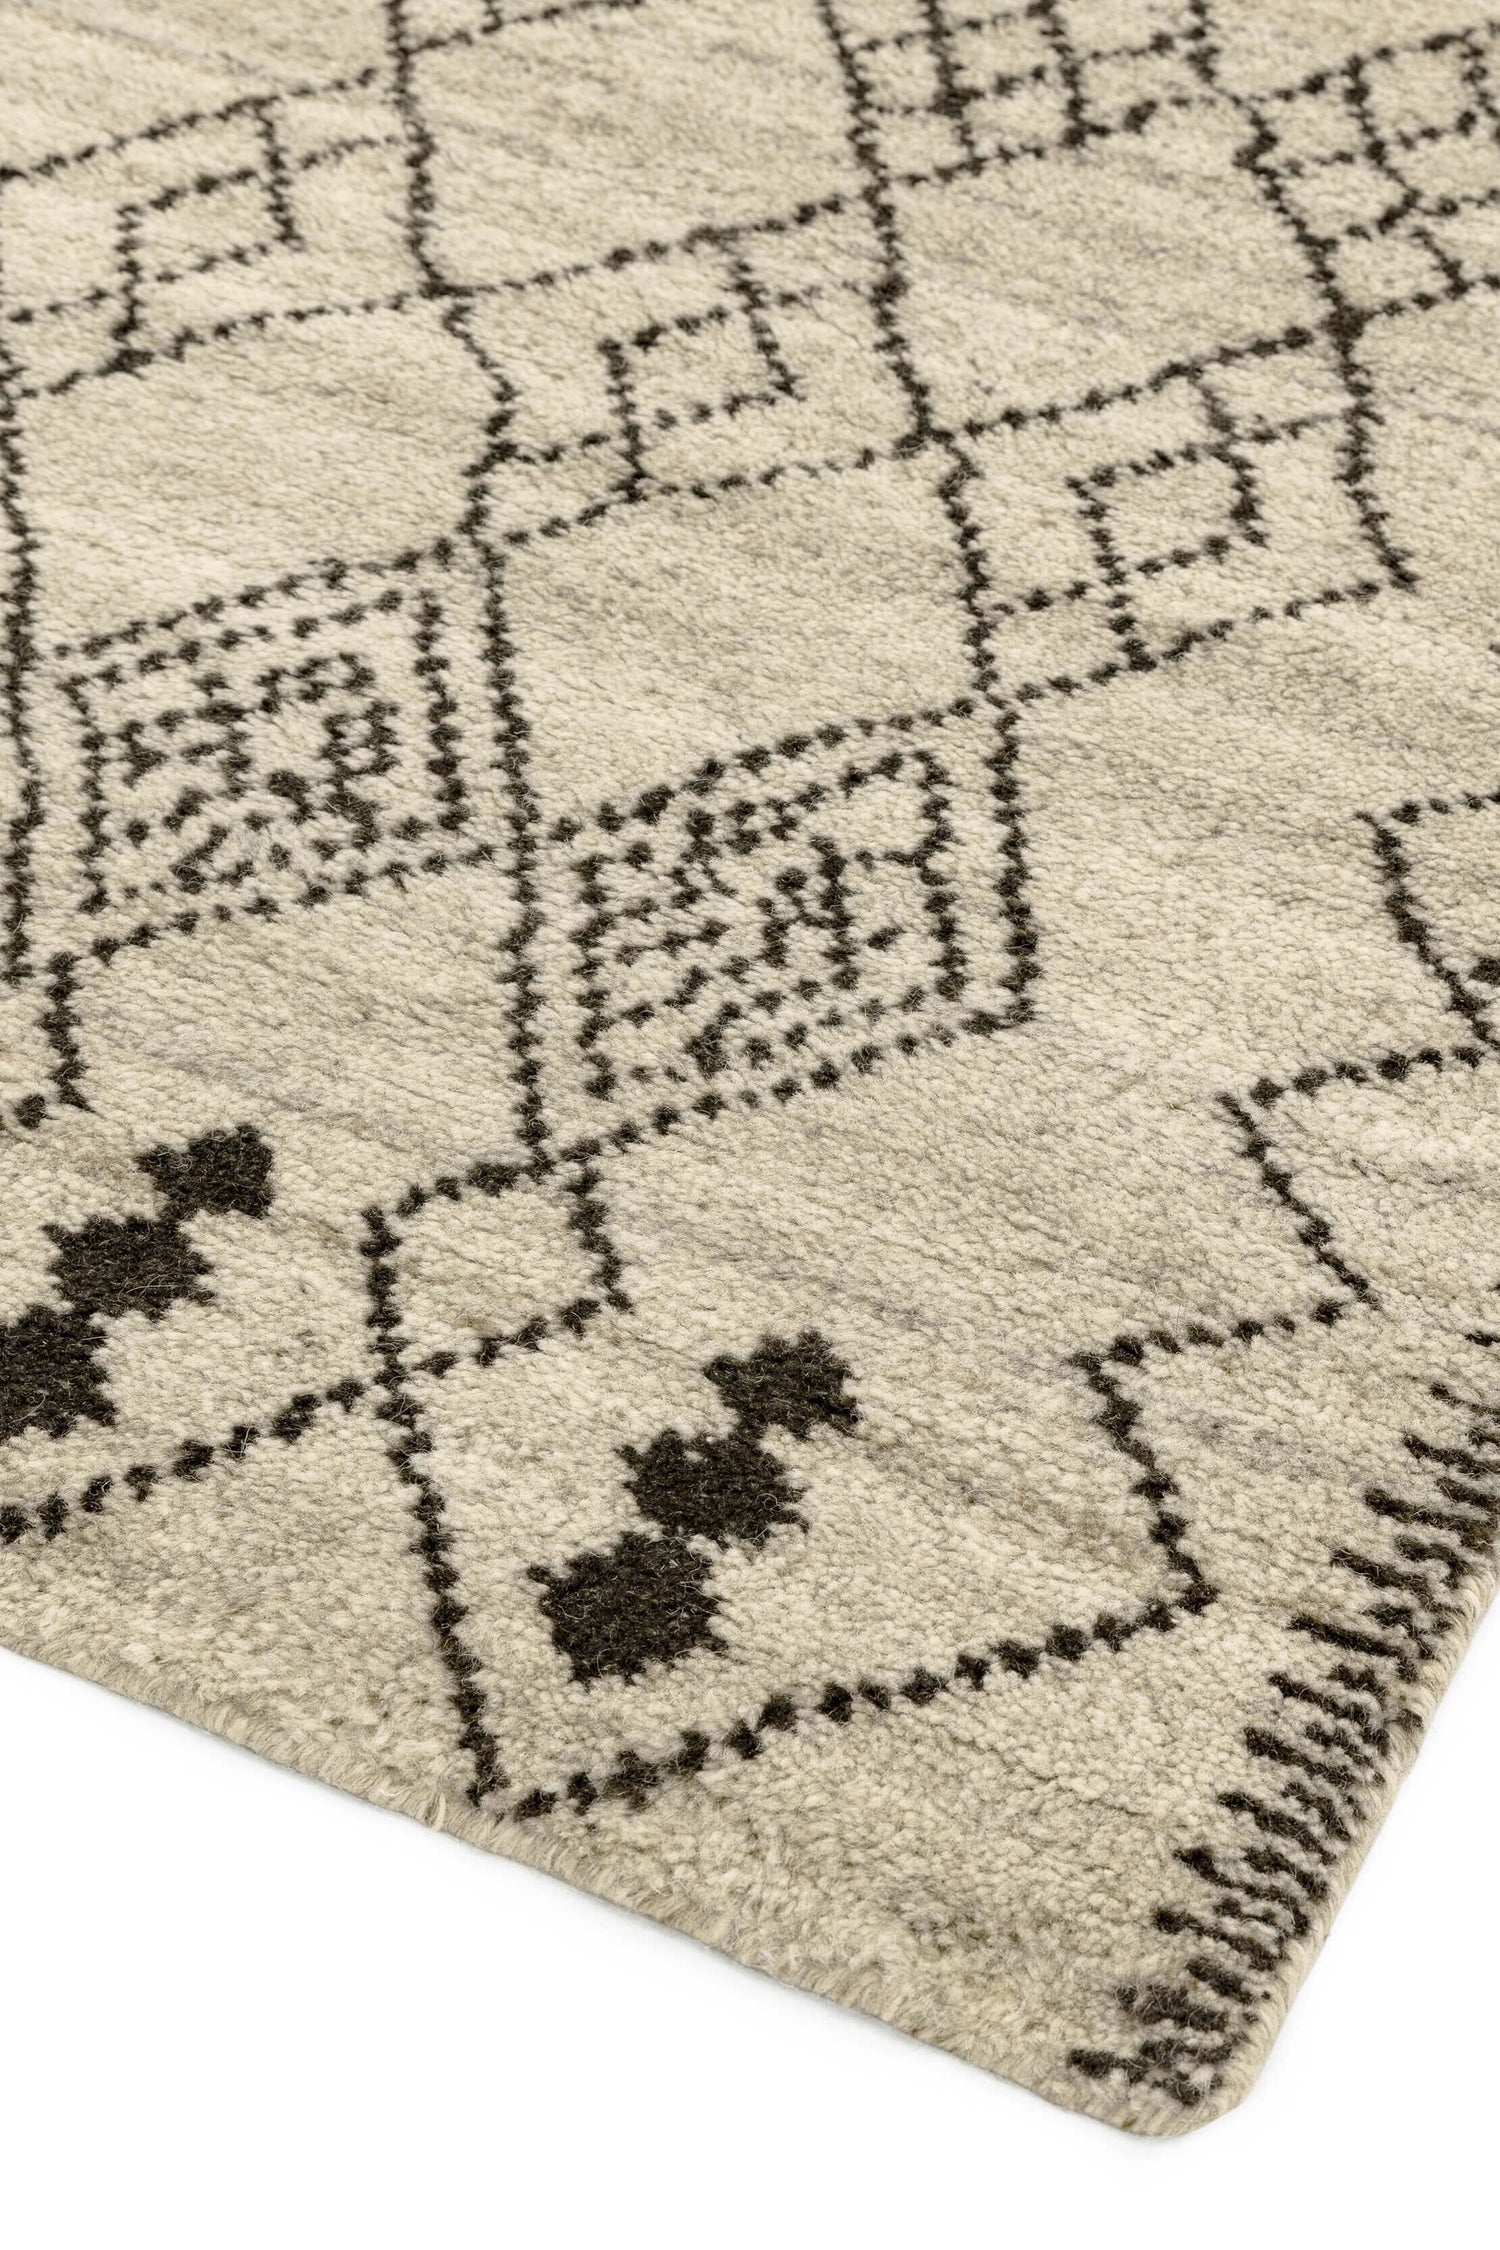  Asiatic Carpets-Asiatic Carpets Amira Hand Knotted Rug AM01 - 120 x 170cm-Beige, Natural 821 